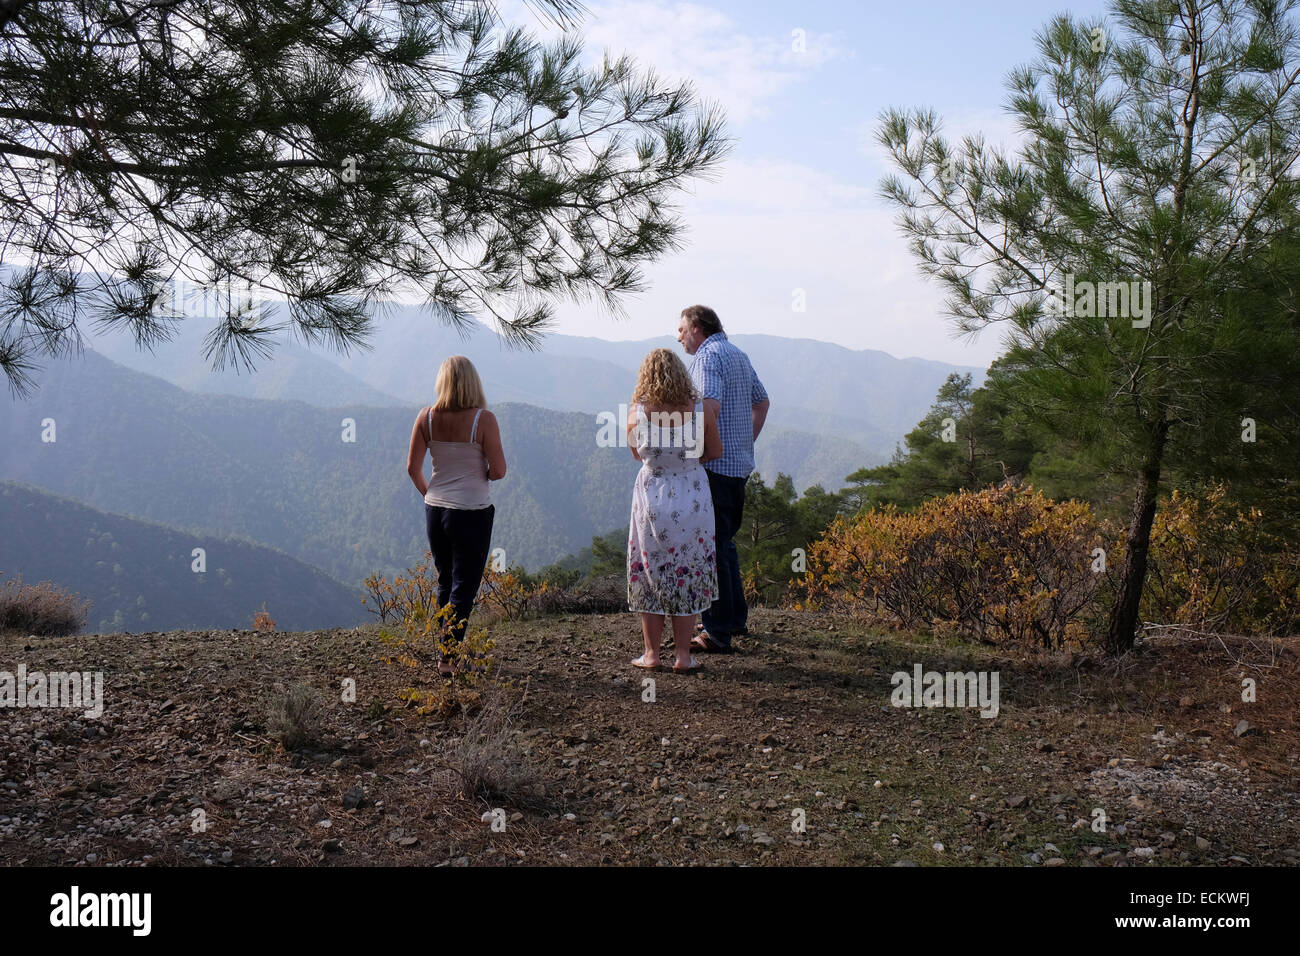 Three people admiring the scenery in the Troodos Mountains, Cedar Valley, Cyprus Stock Photo